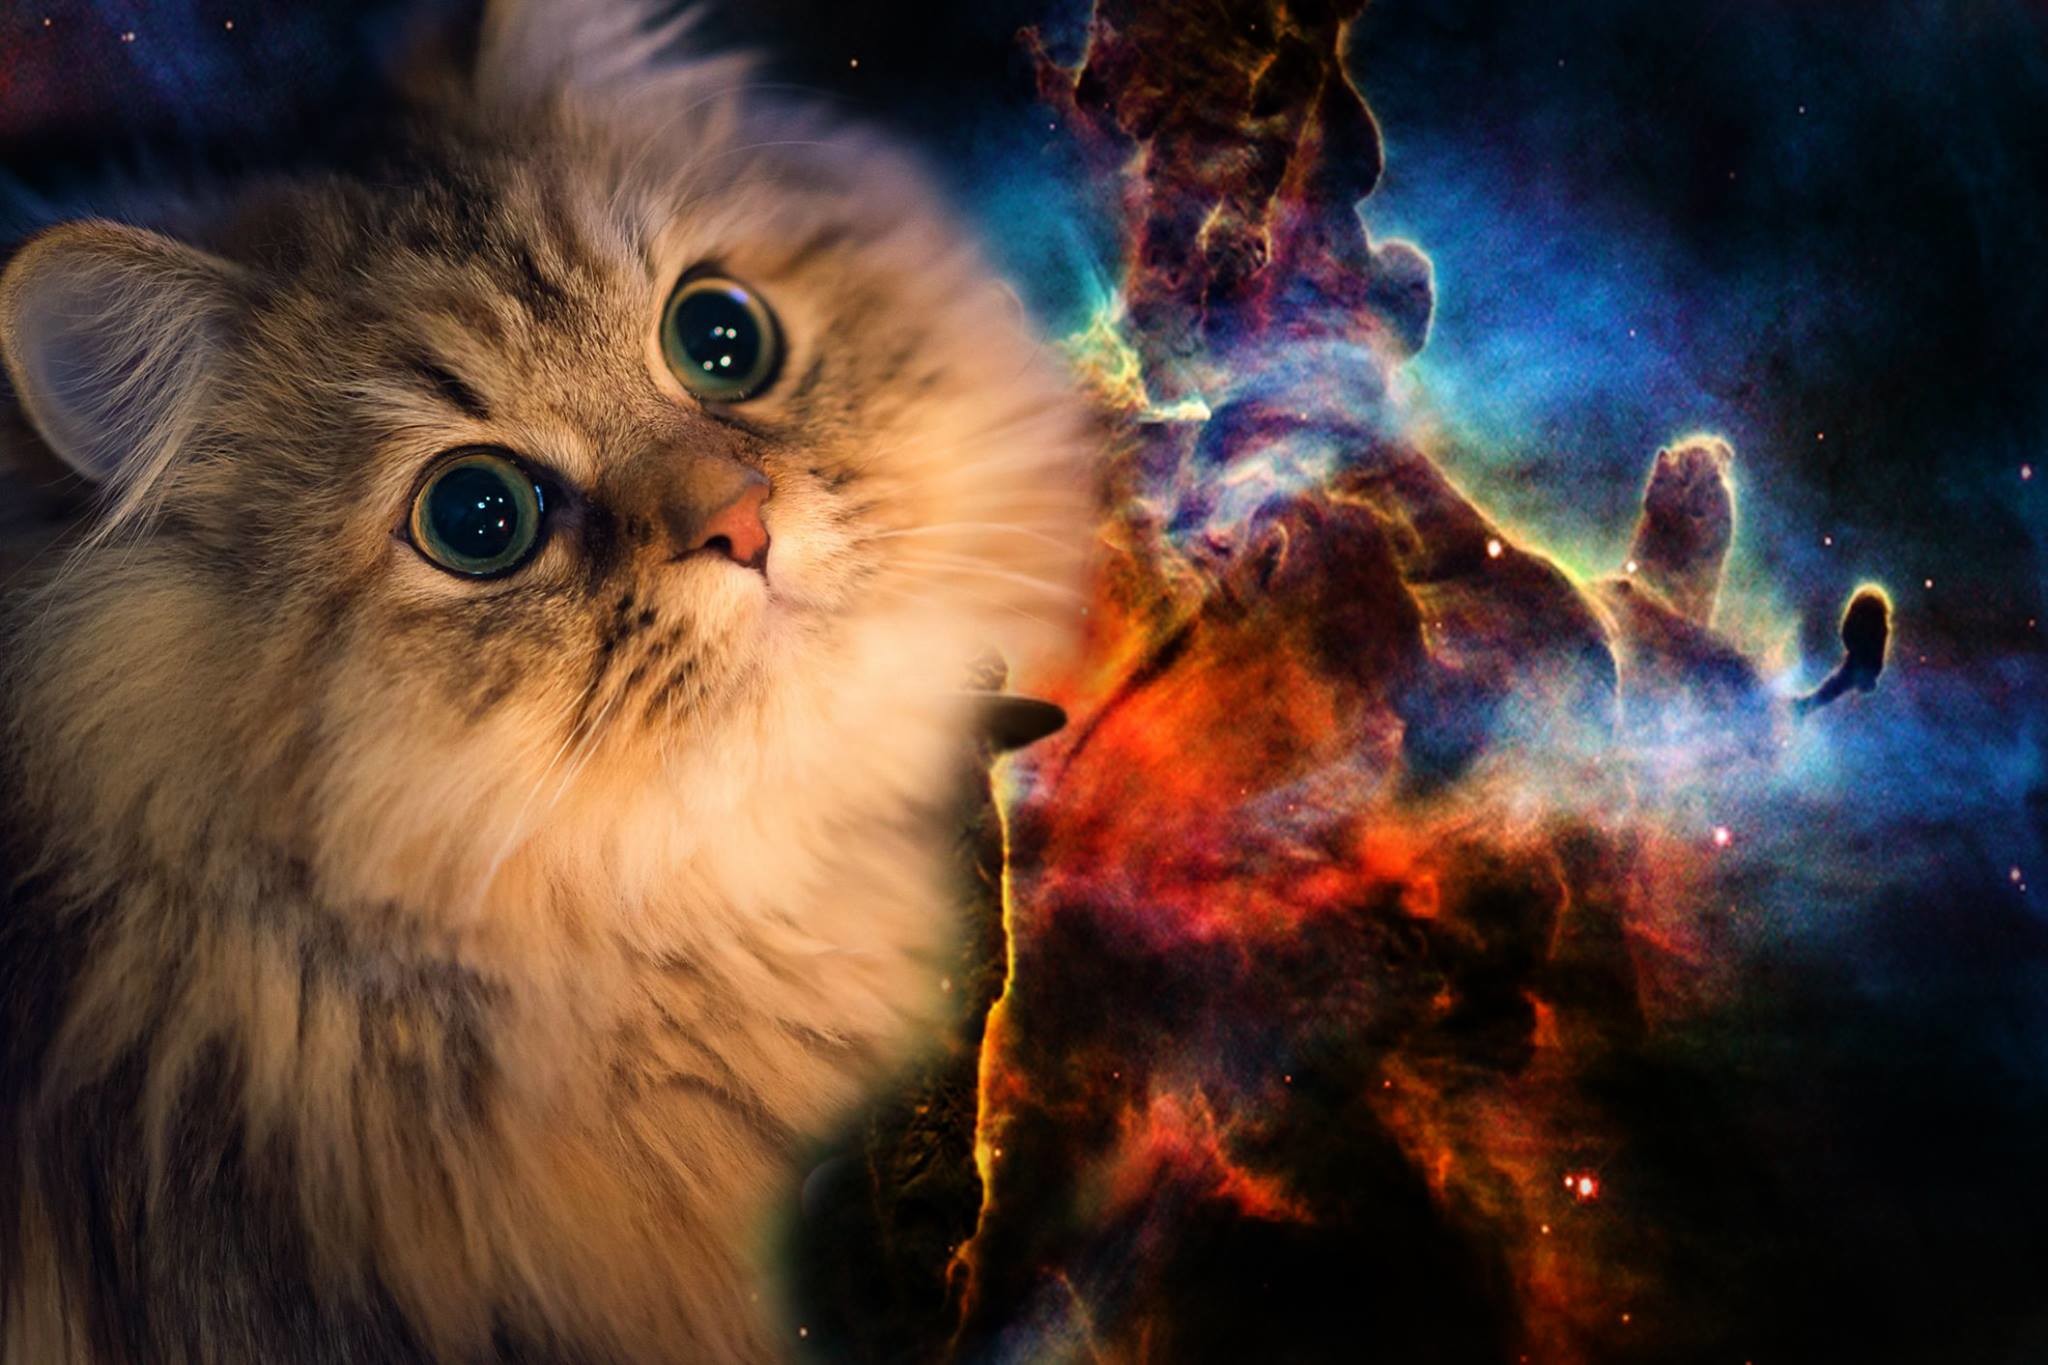 2048x1365 Collection of Galaxy Cat Wallpaper on HDWallpapers Galaxy cat wallpaper  Wallpapers)